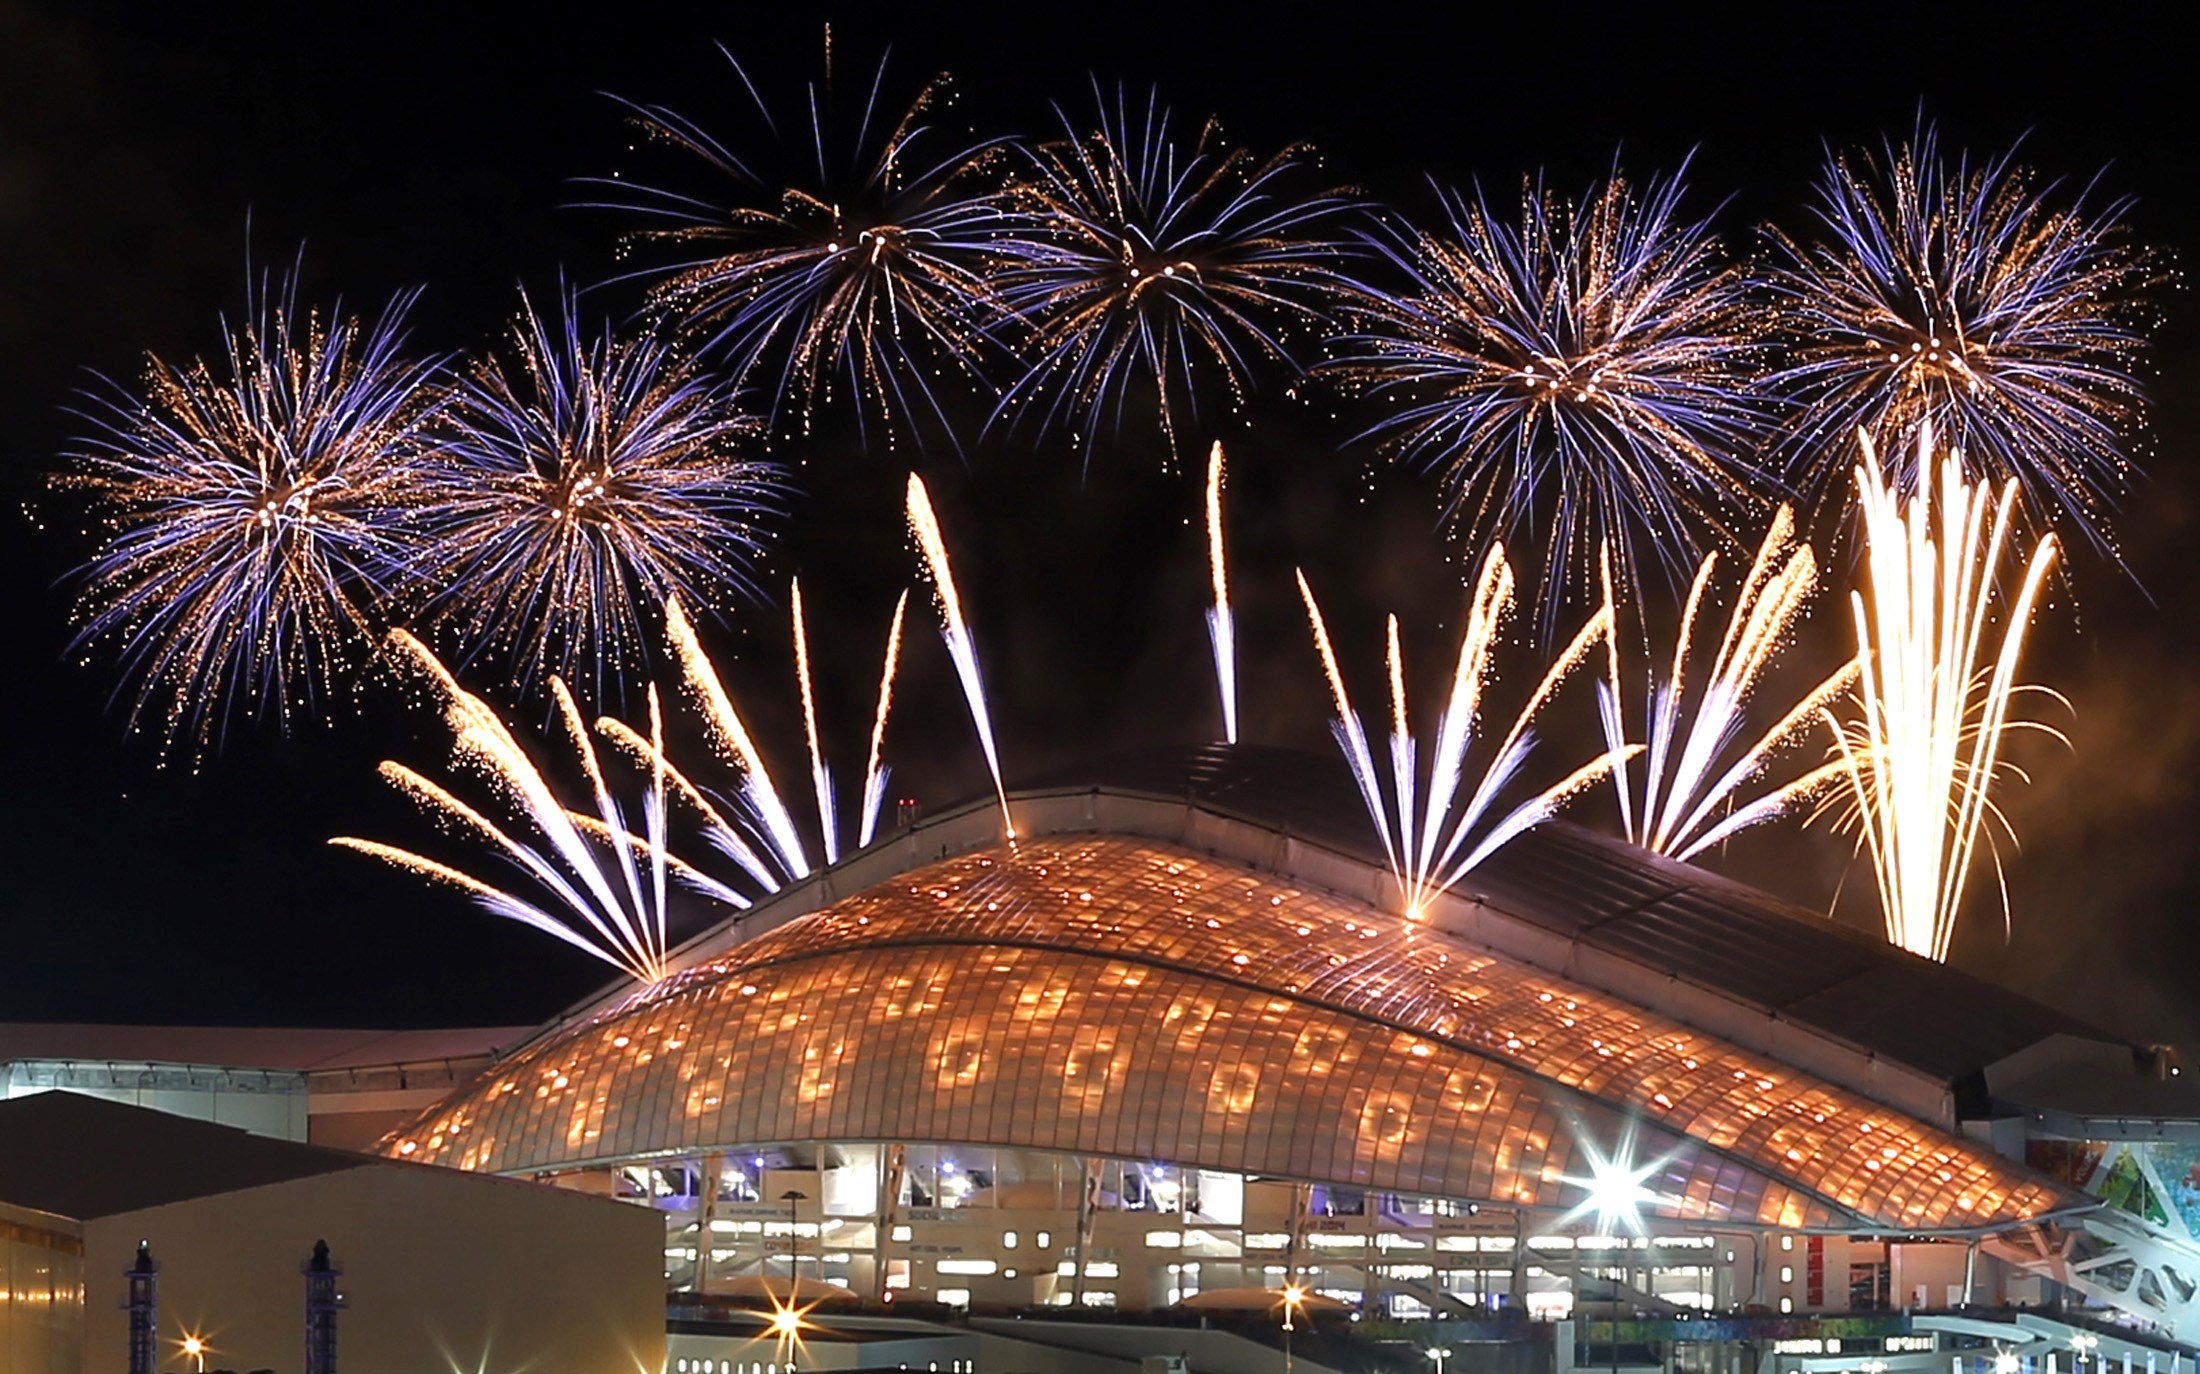 Fireworks are seen over the Fisht Olympic Stadium at the Olympic Park during the rehearsal of the opening ceremony in Sochi